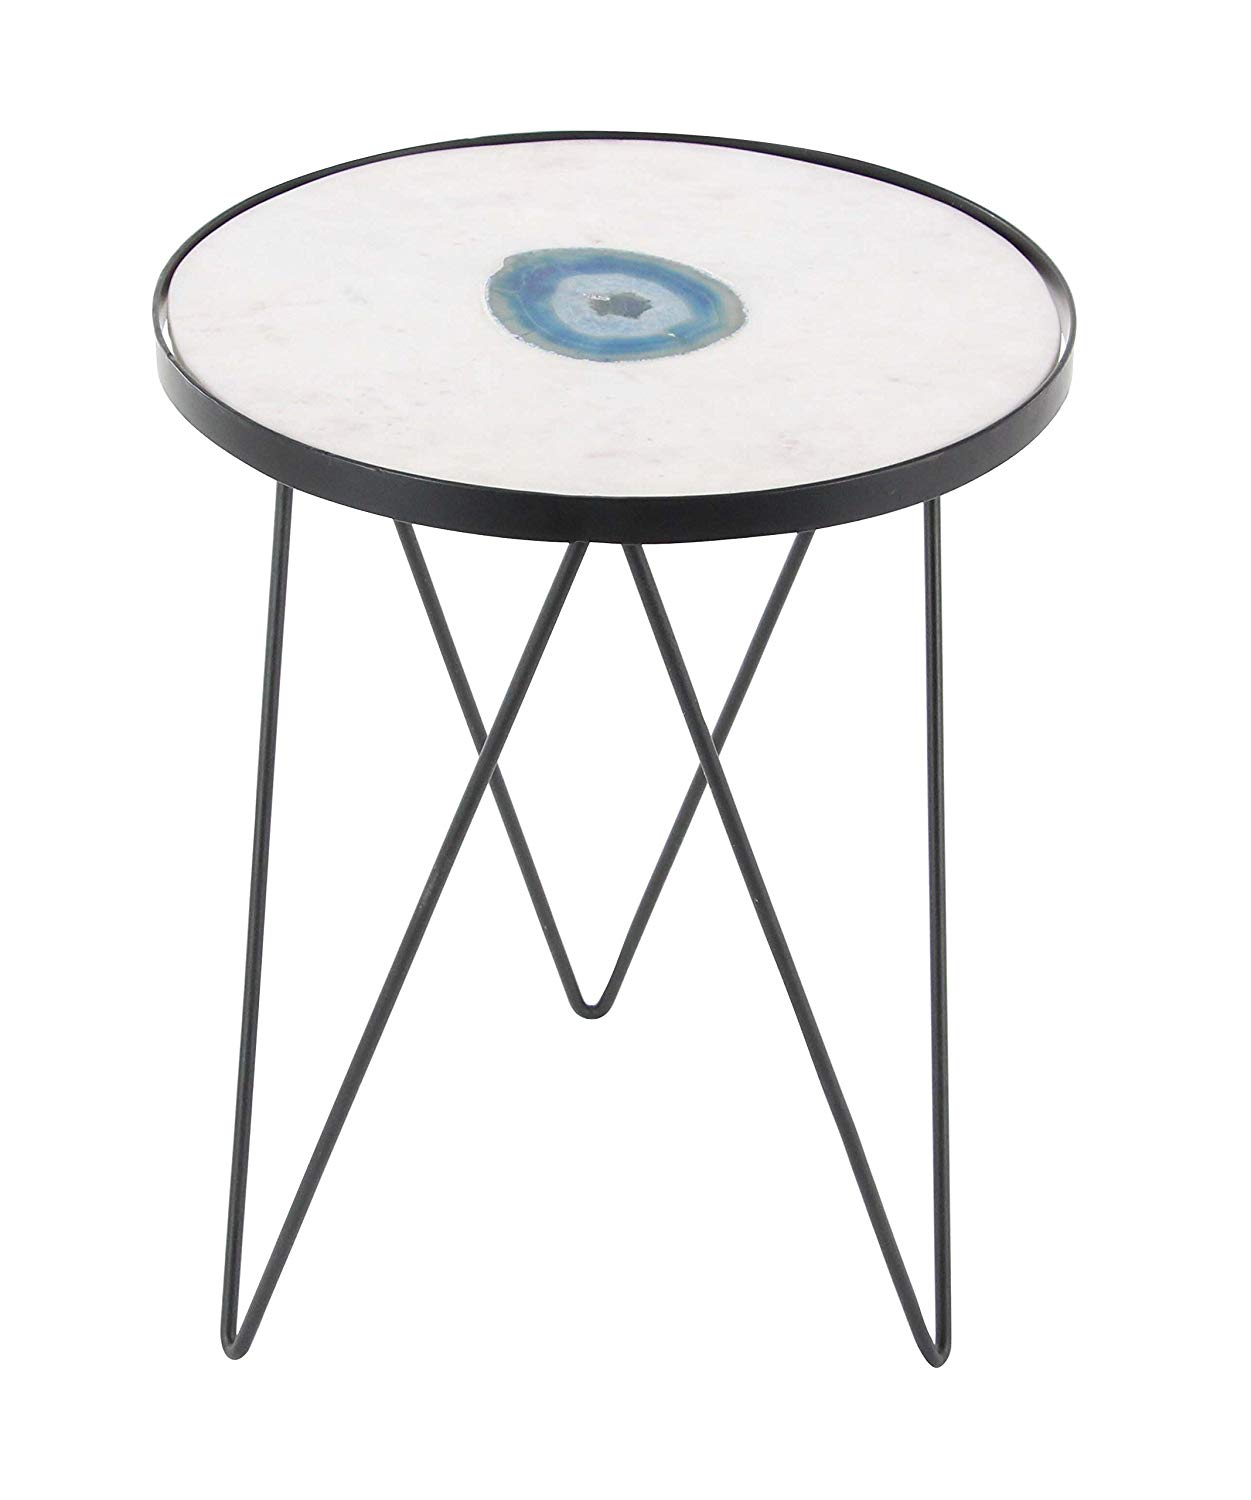 charming white marble and metal round accent table small for faux tablecloth pedestal wooden unfinished wood ideas covers decorating threshold side full size globe lampshade light